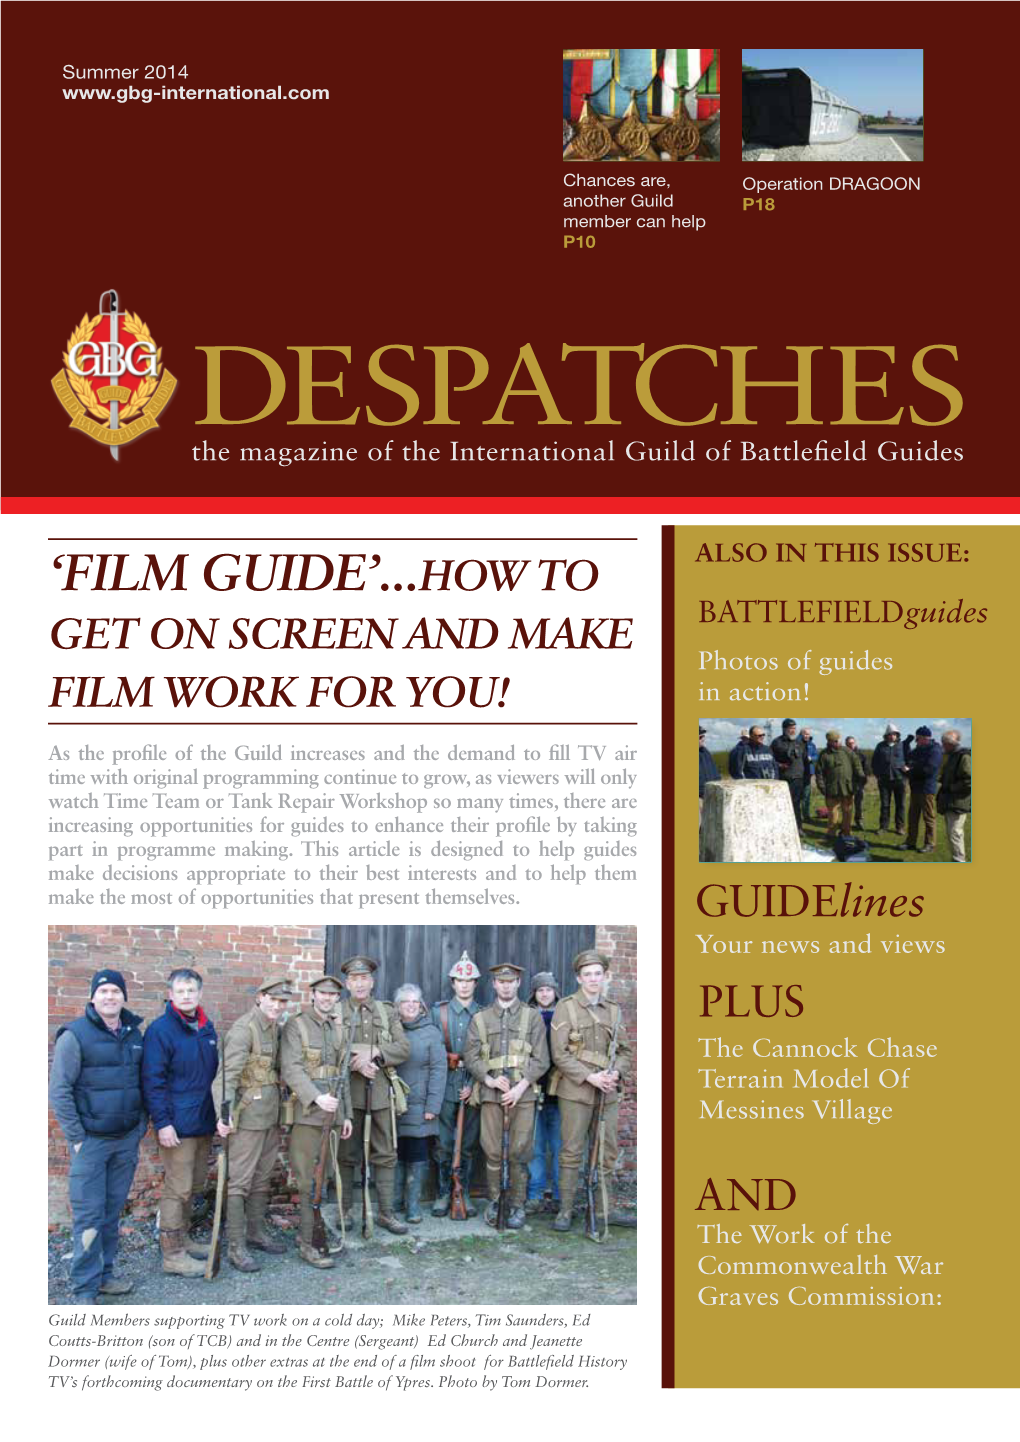 Despatches the Magazine of the International Guild of Battlefield Guides